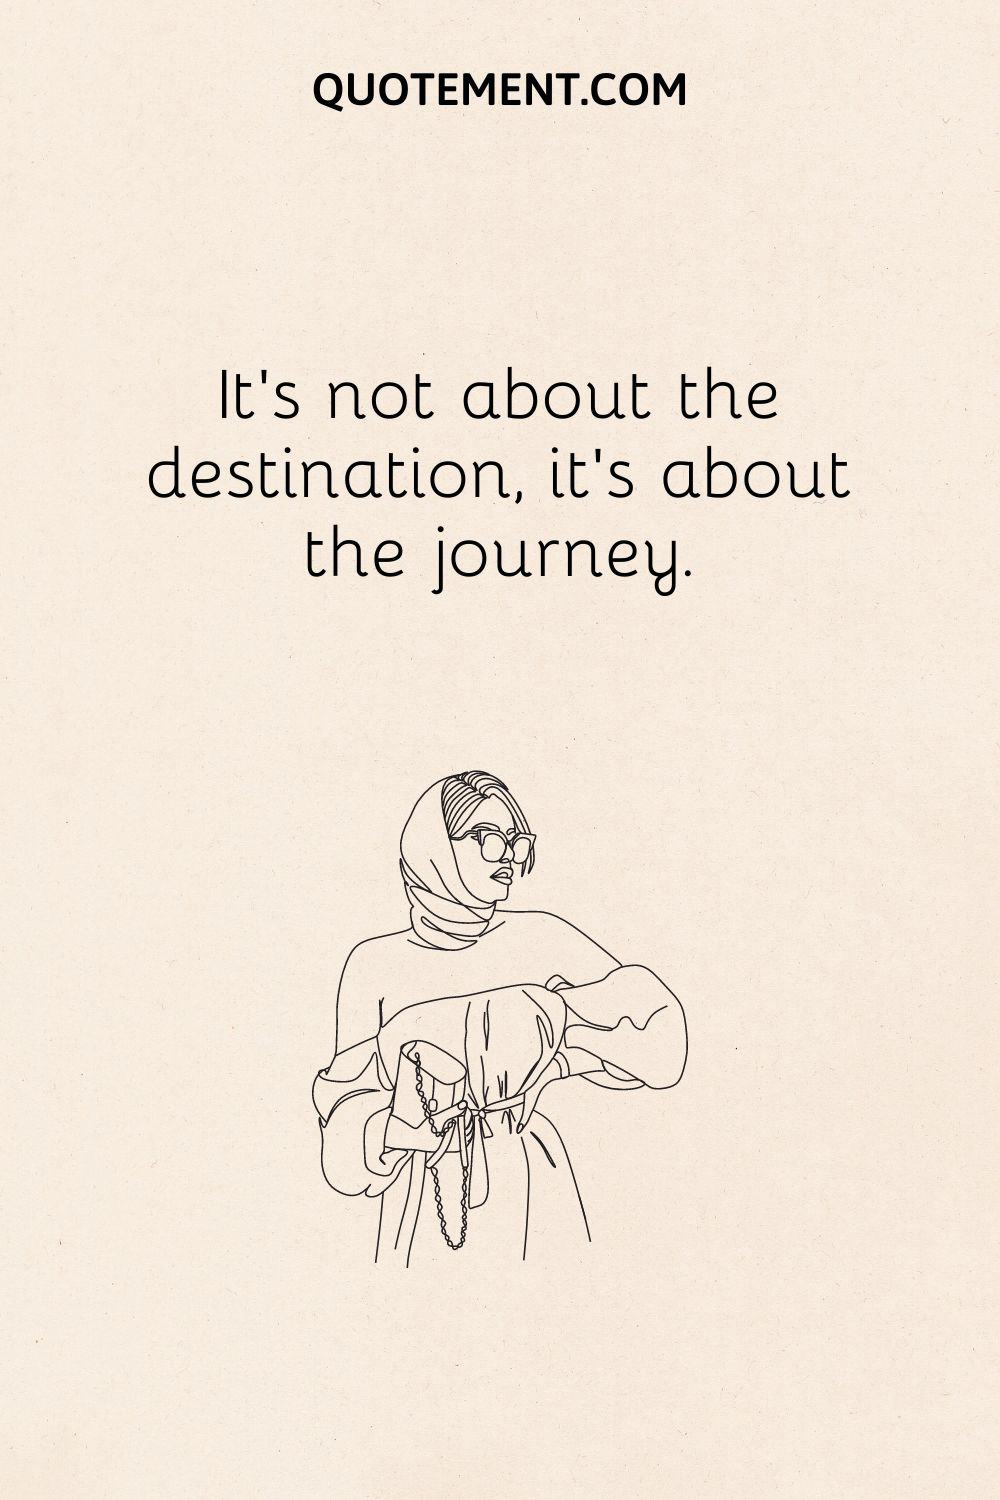 It’s not about the destination, it’s about the journey.